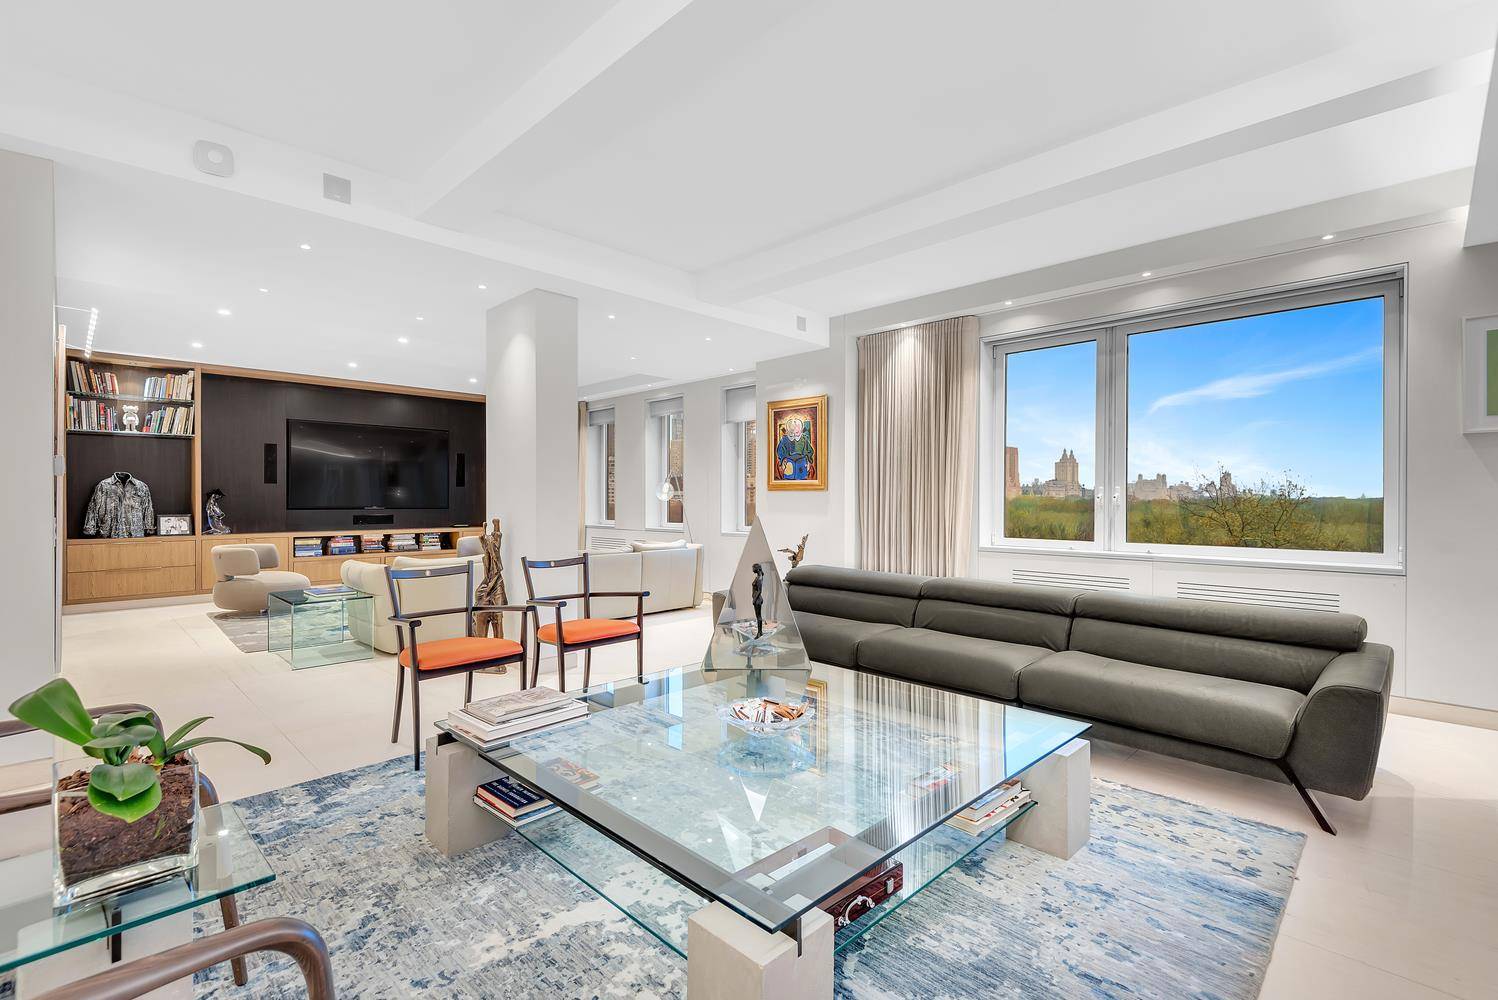 Welcome to this exquisite apartment nestled on Central Park South, boasting luxury and elegance in every detail.